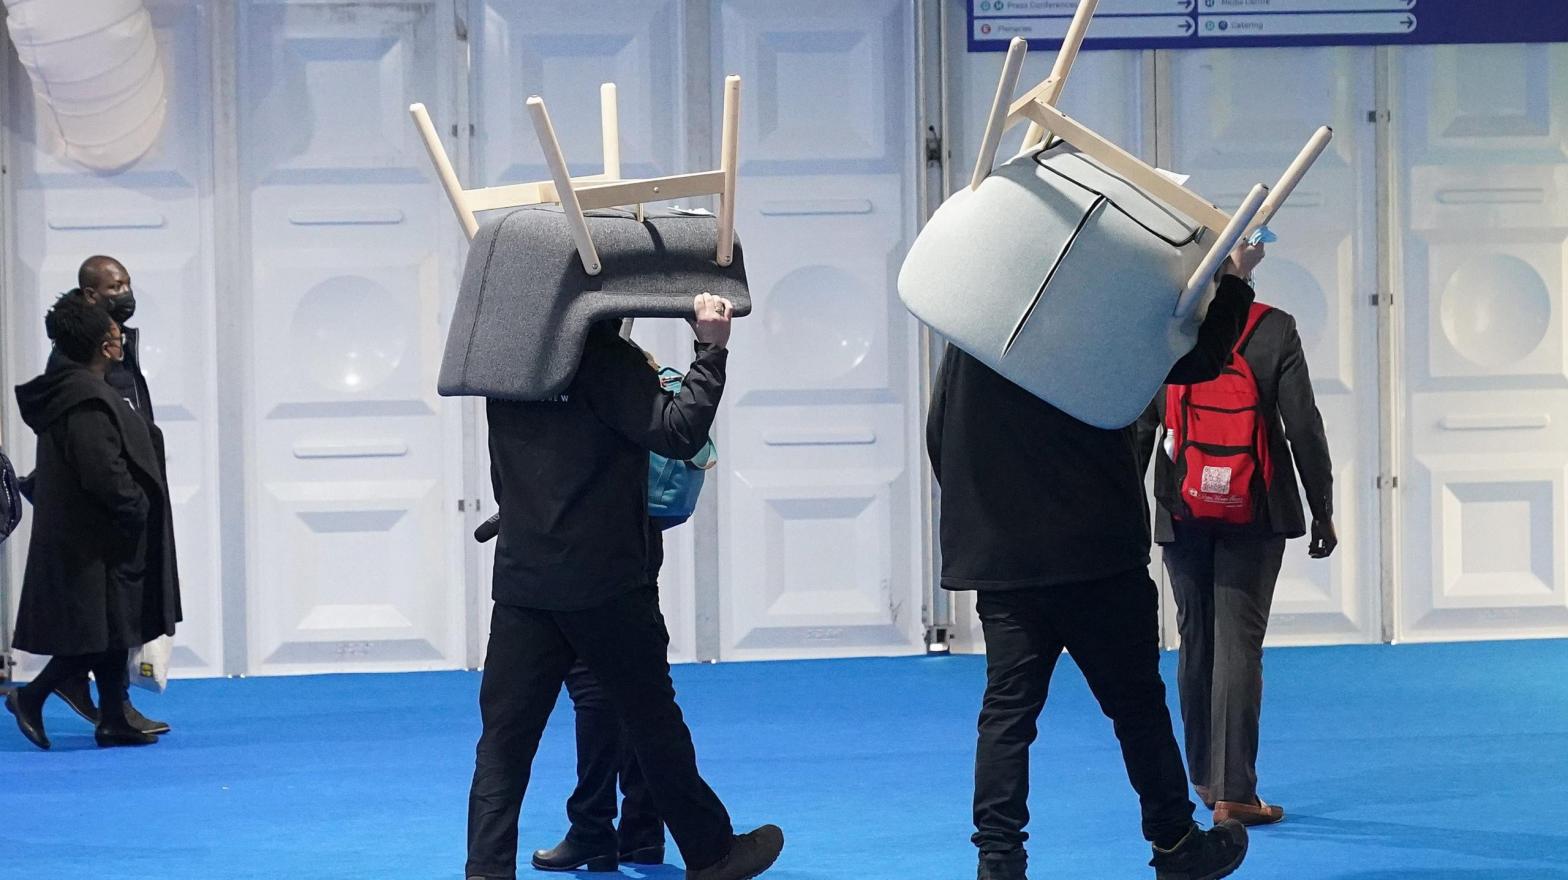 Workers carry chairs supplied by Swedish furniture maker IKEA. IKEA provided seating and tables for delegates at COP26 in 2021 in Glasgow, Scotland. (Photo: Christopher Furlong, Getty Images)